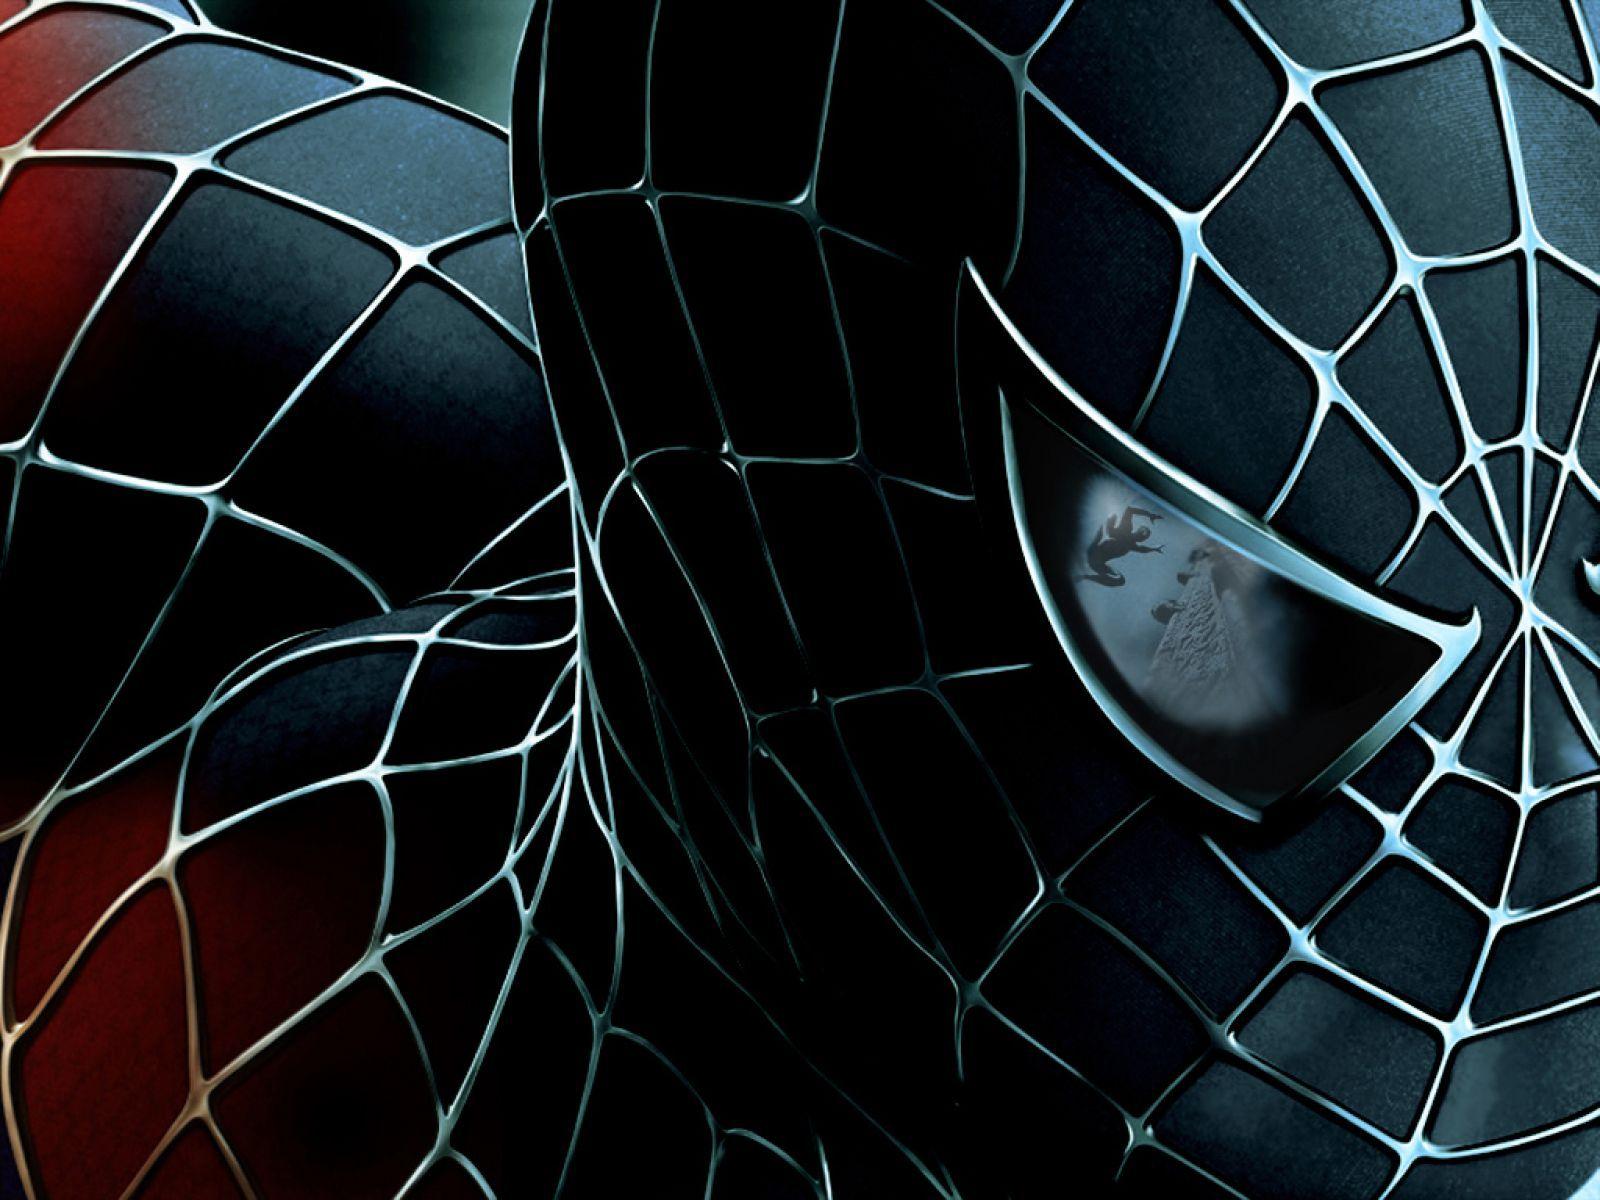 Wallpaper black and red, suit, spider-man, video game desktop wallpaper, hd  image, picture, background, dade03